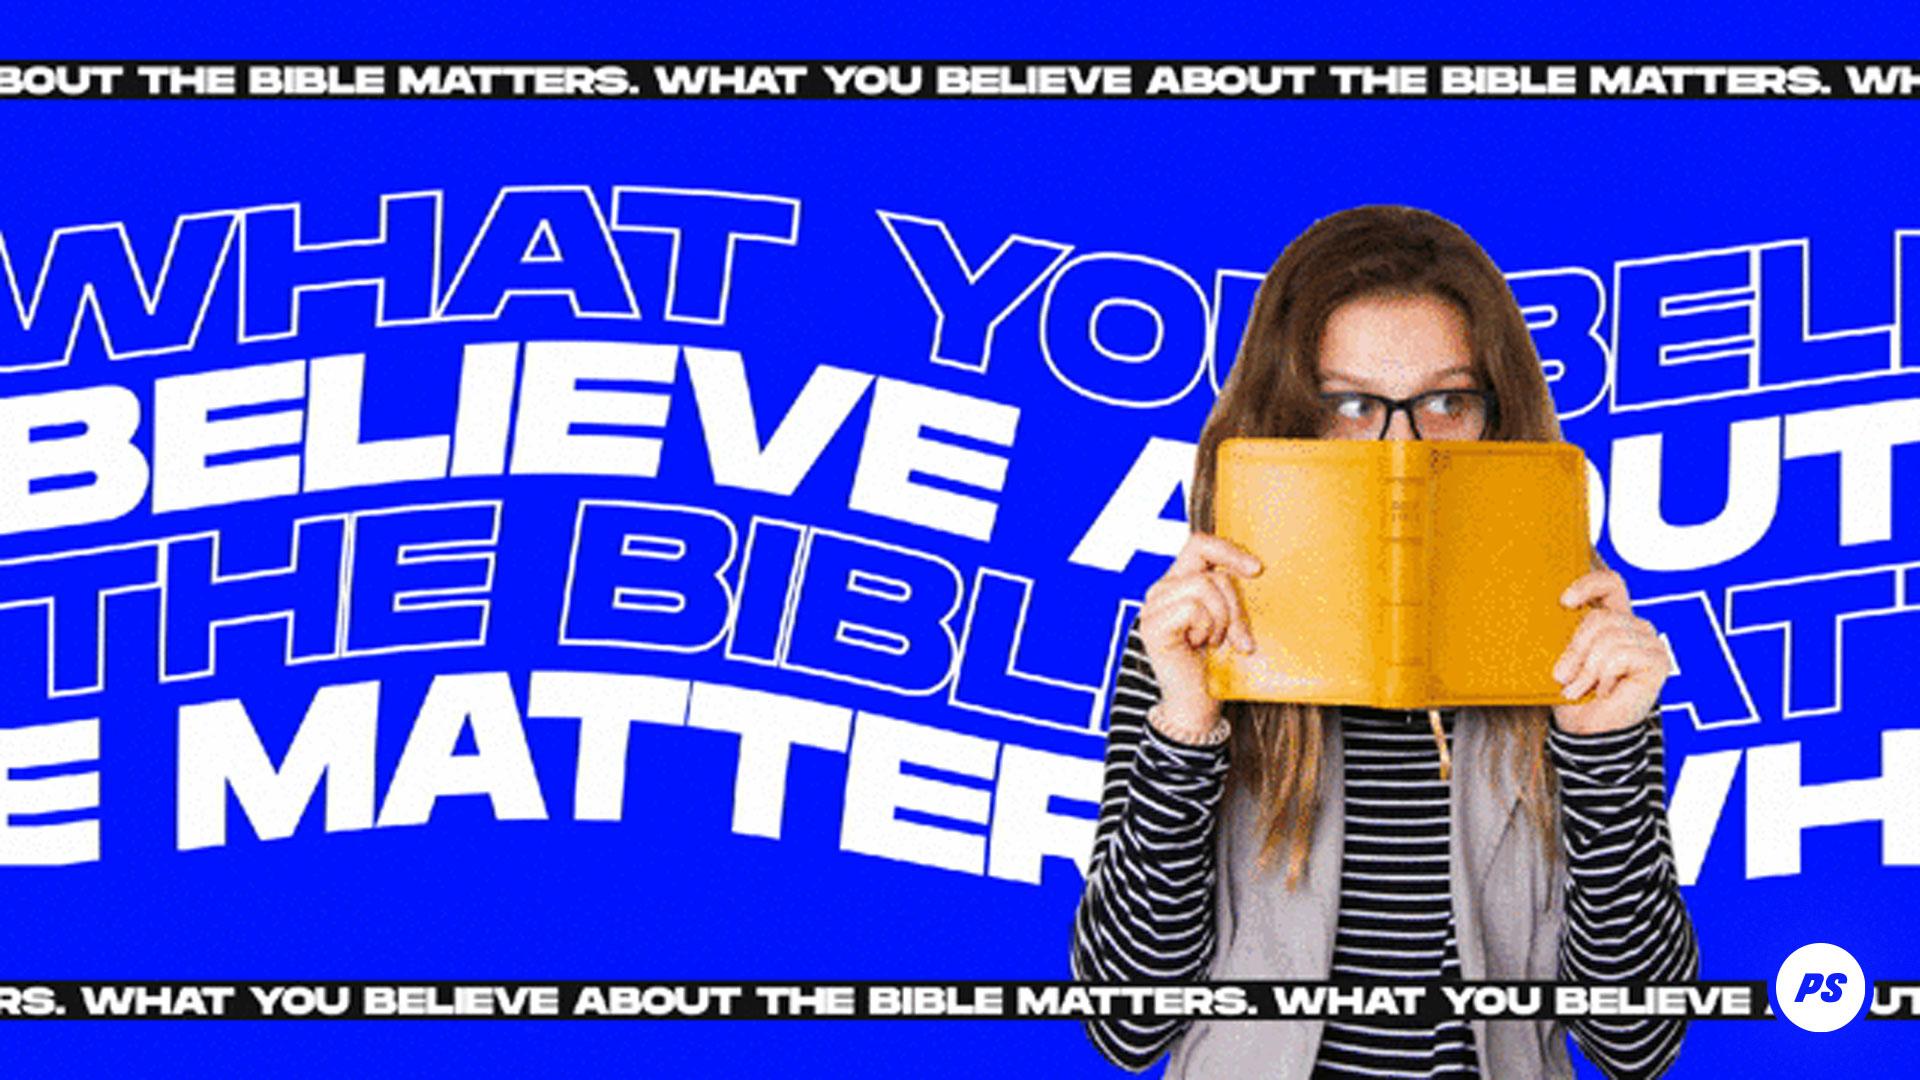 Featured image for “What You Believe About The Bible Matters”